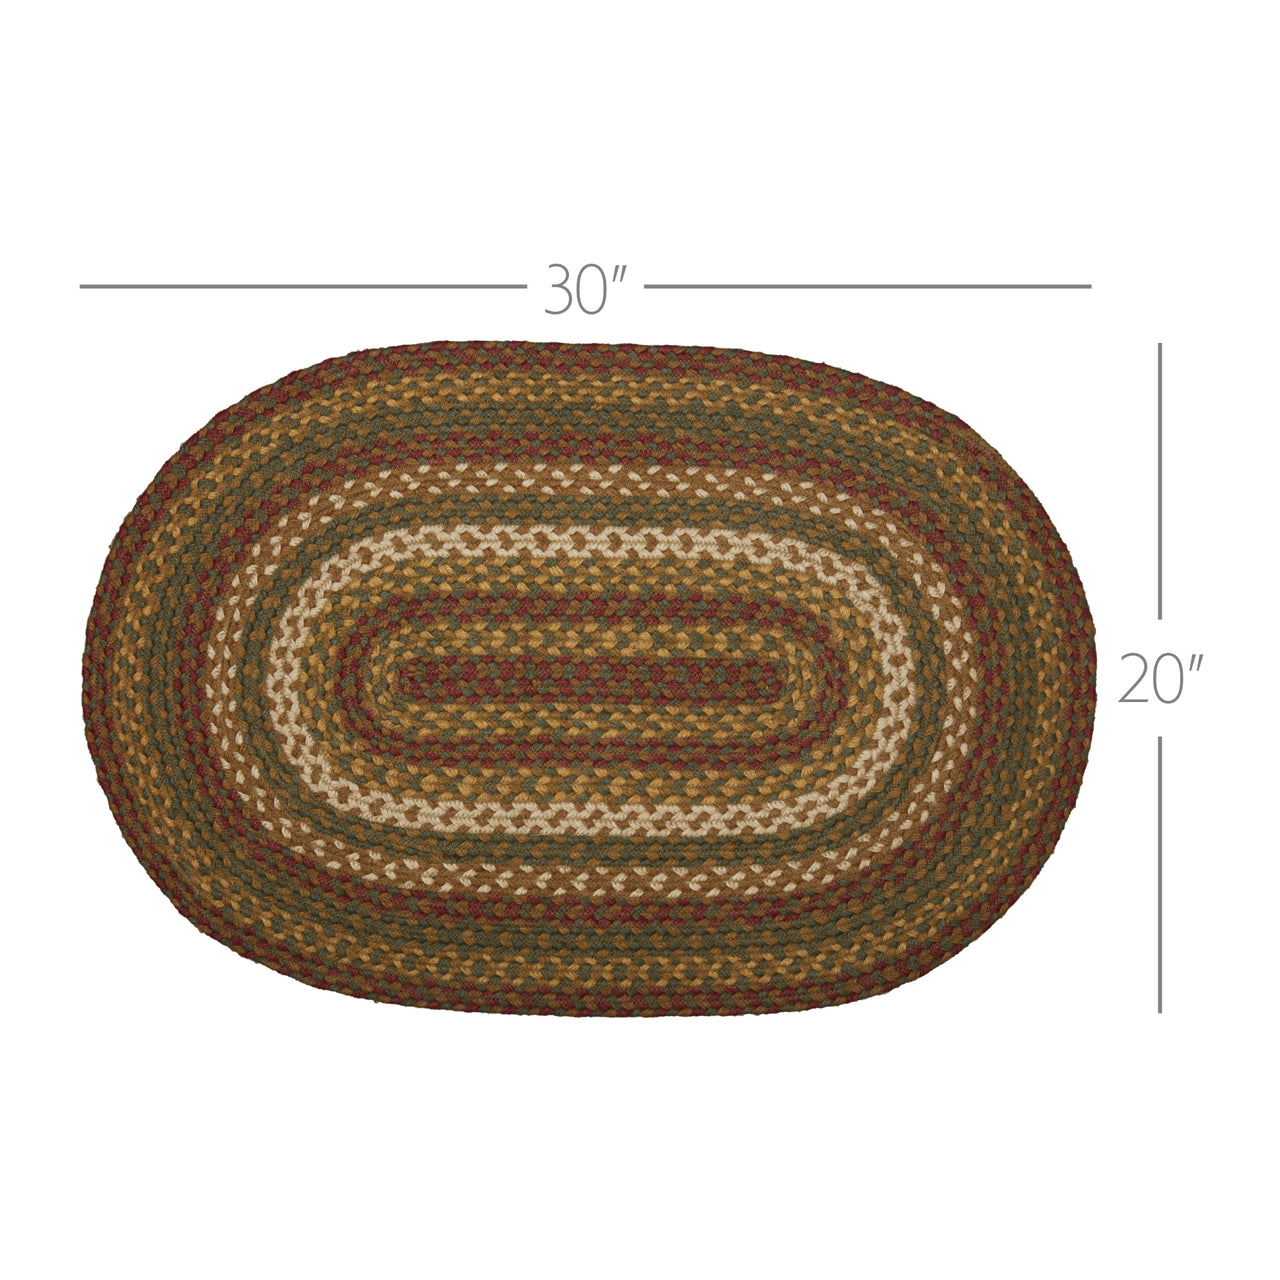 Tea Cabin Jute Braided Rug Oval 20"x30" with Rug Pad VHC Brands